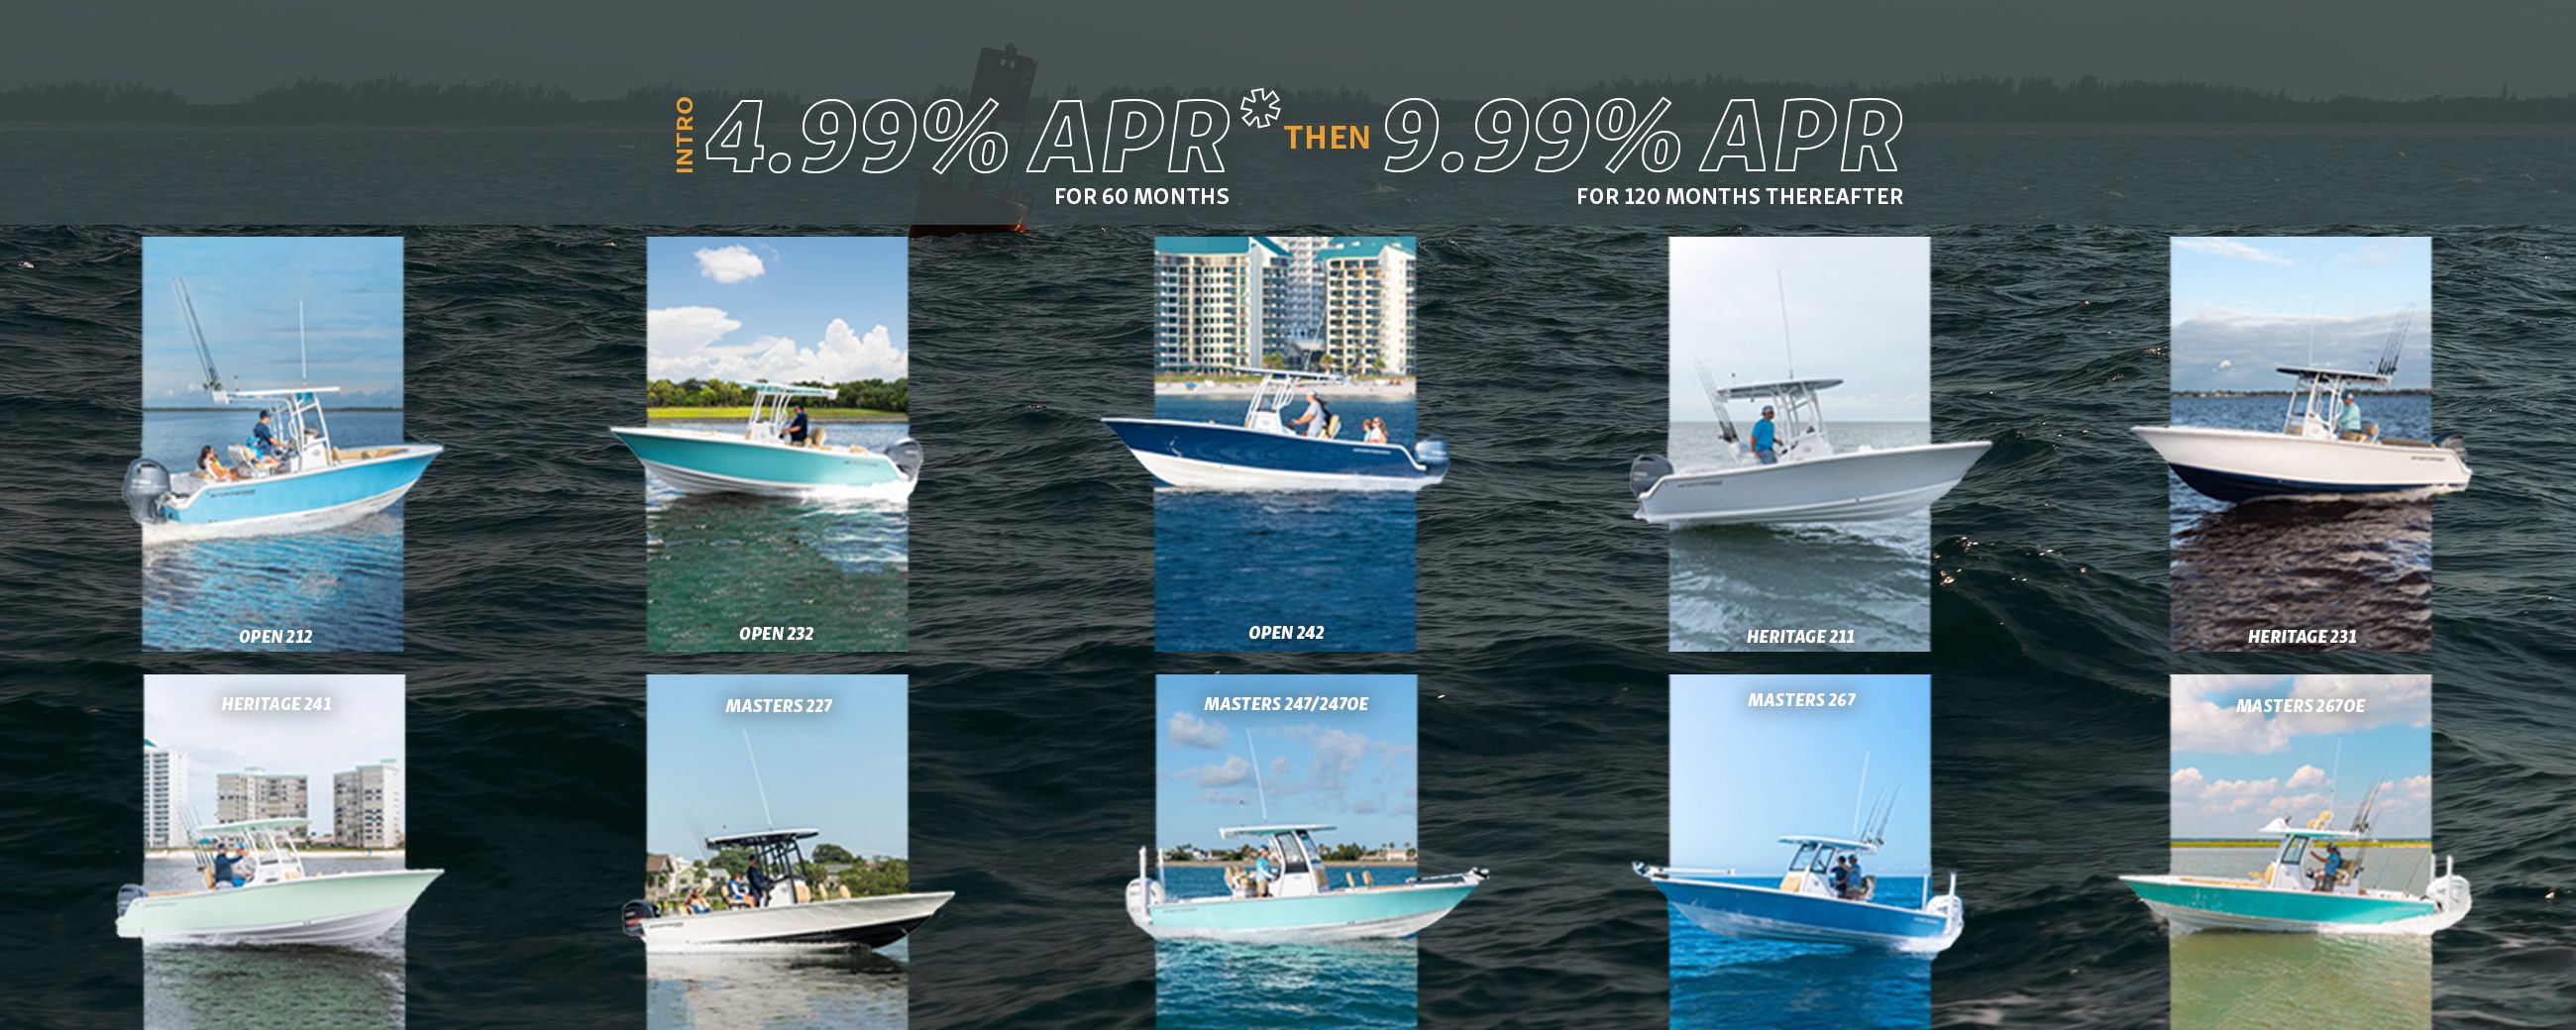 Promotional banner showing the models that are included in the promotion.